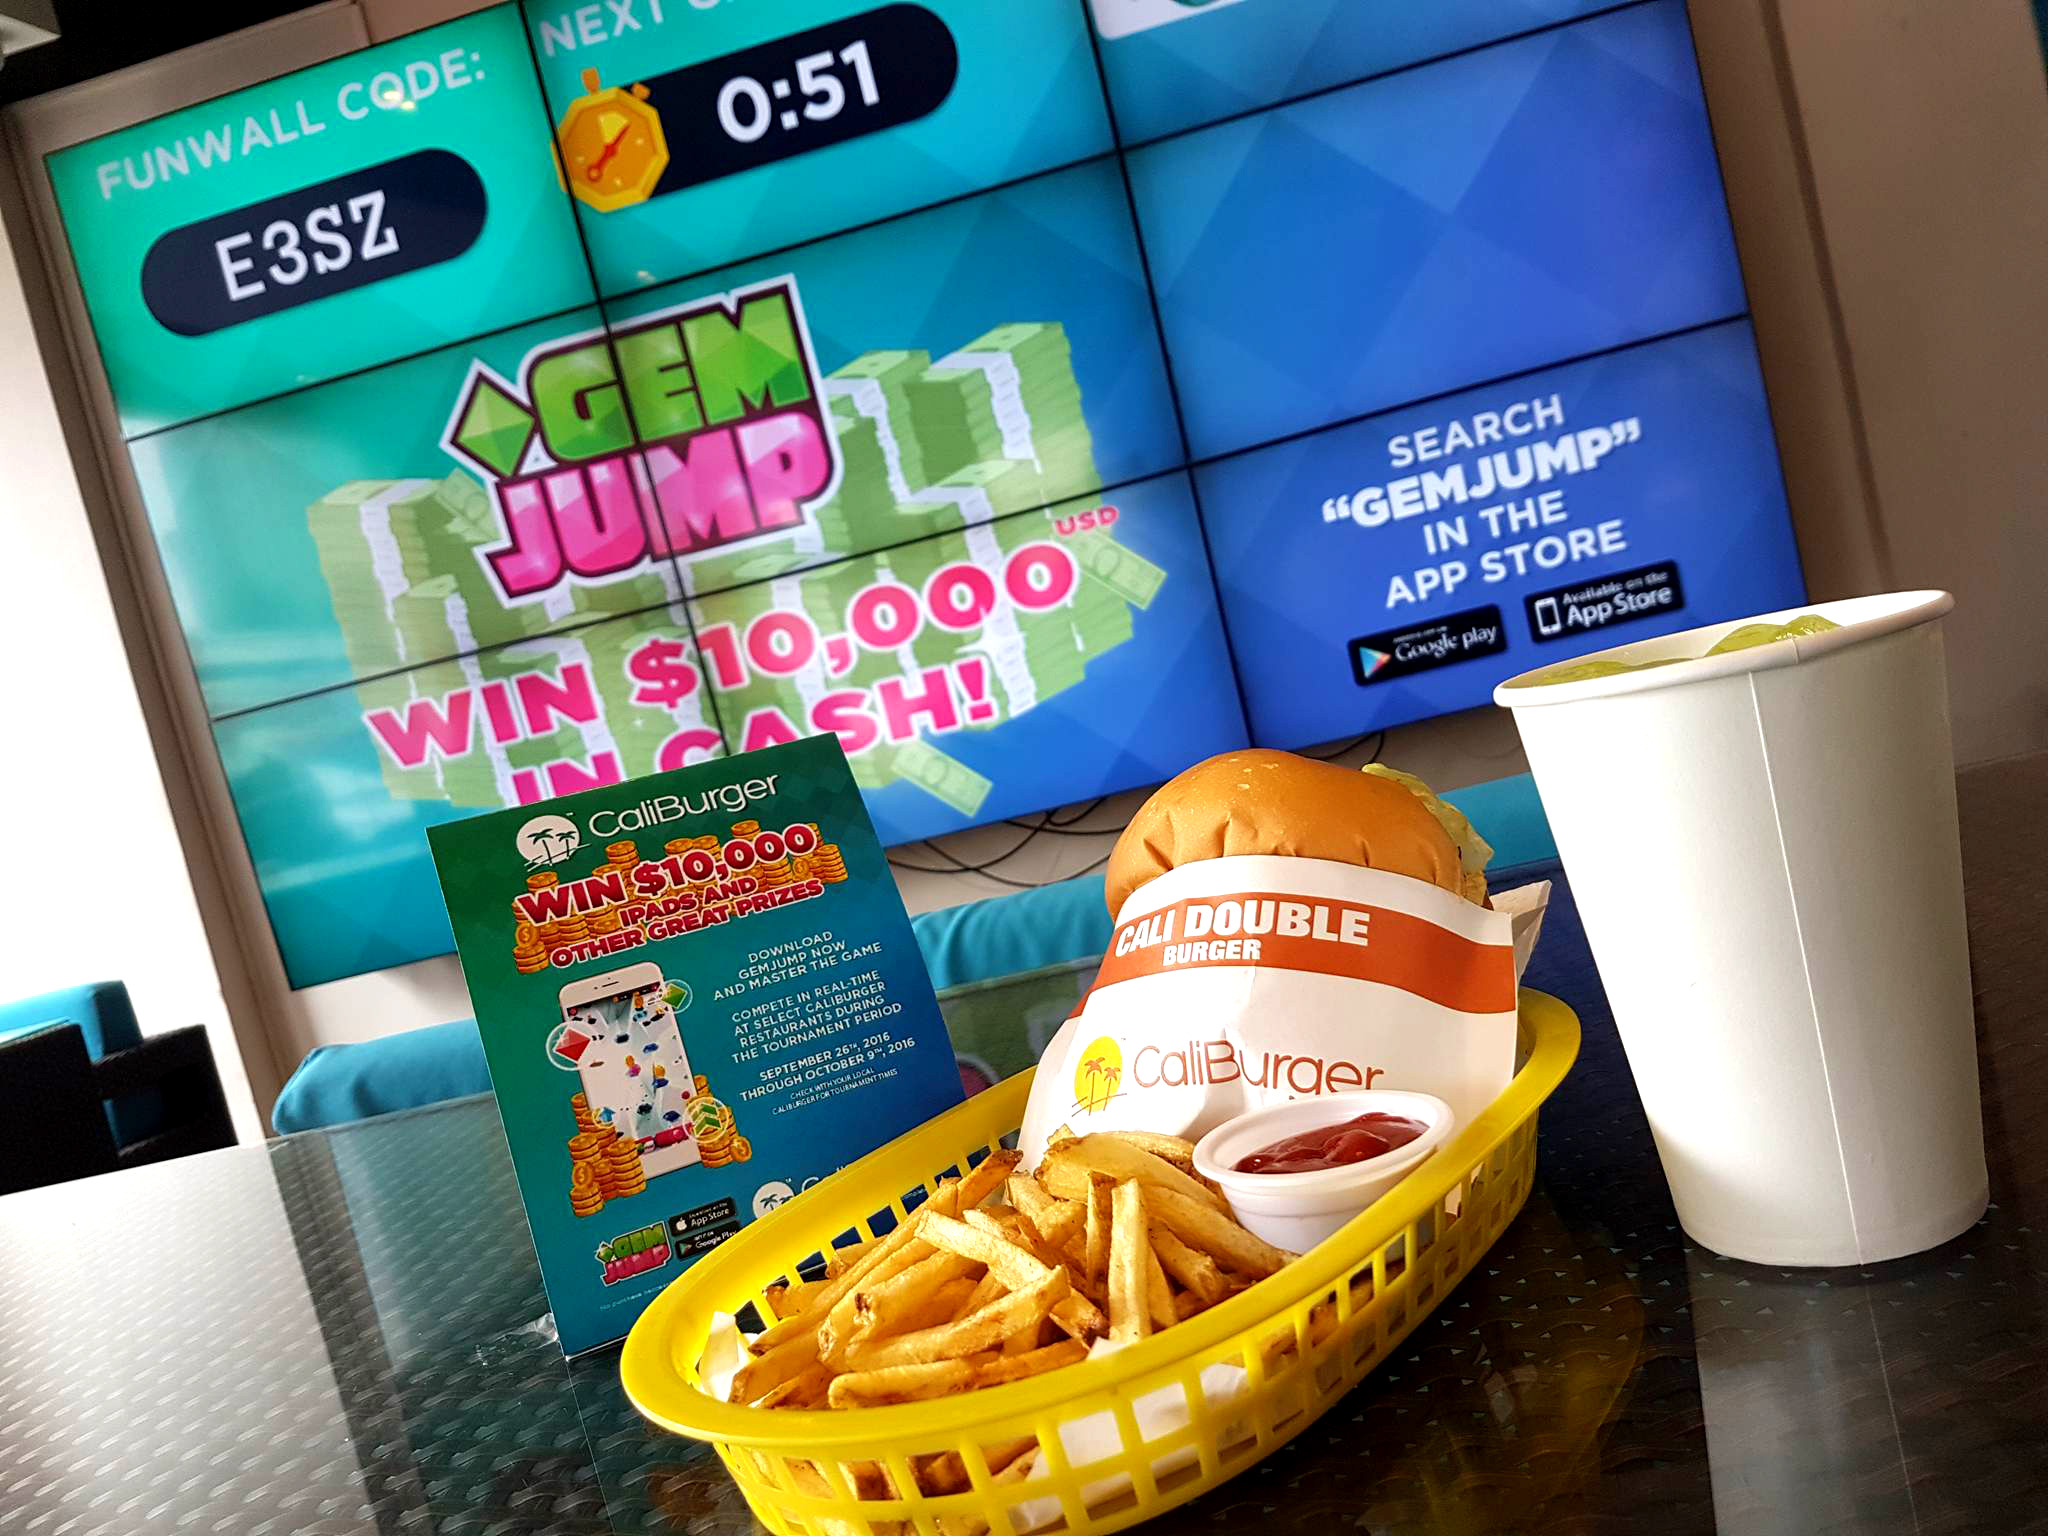 Funwall: Try CaliBurgers Innovative Interactive Video Wall